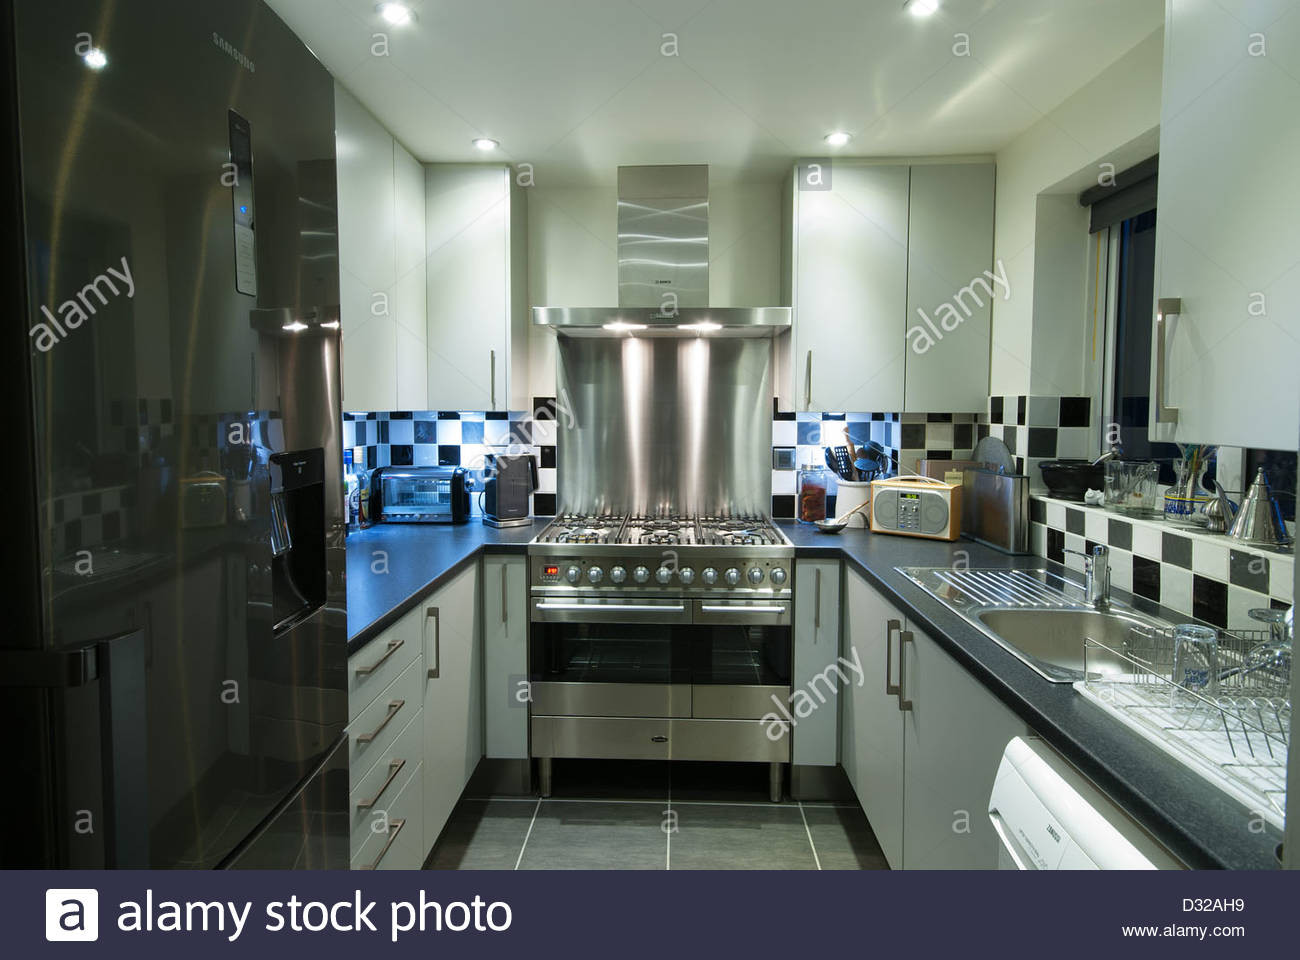 Small Kitchen Range
 A small modern domestic kitchen with a stainless steel